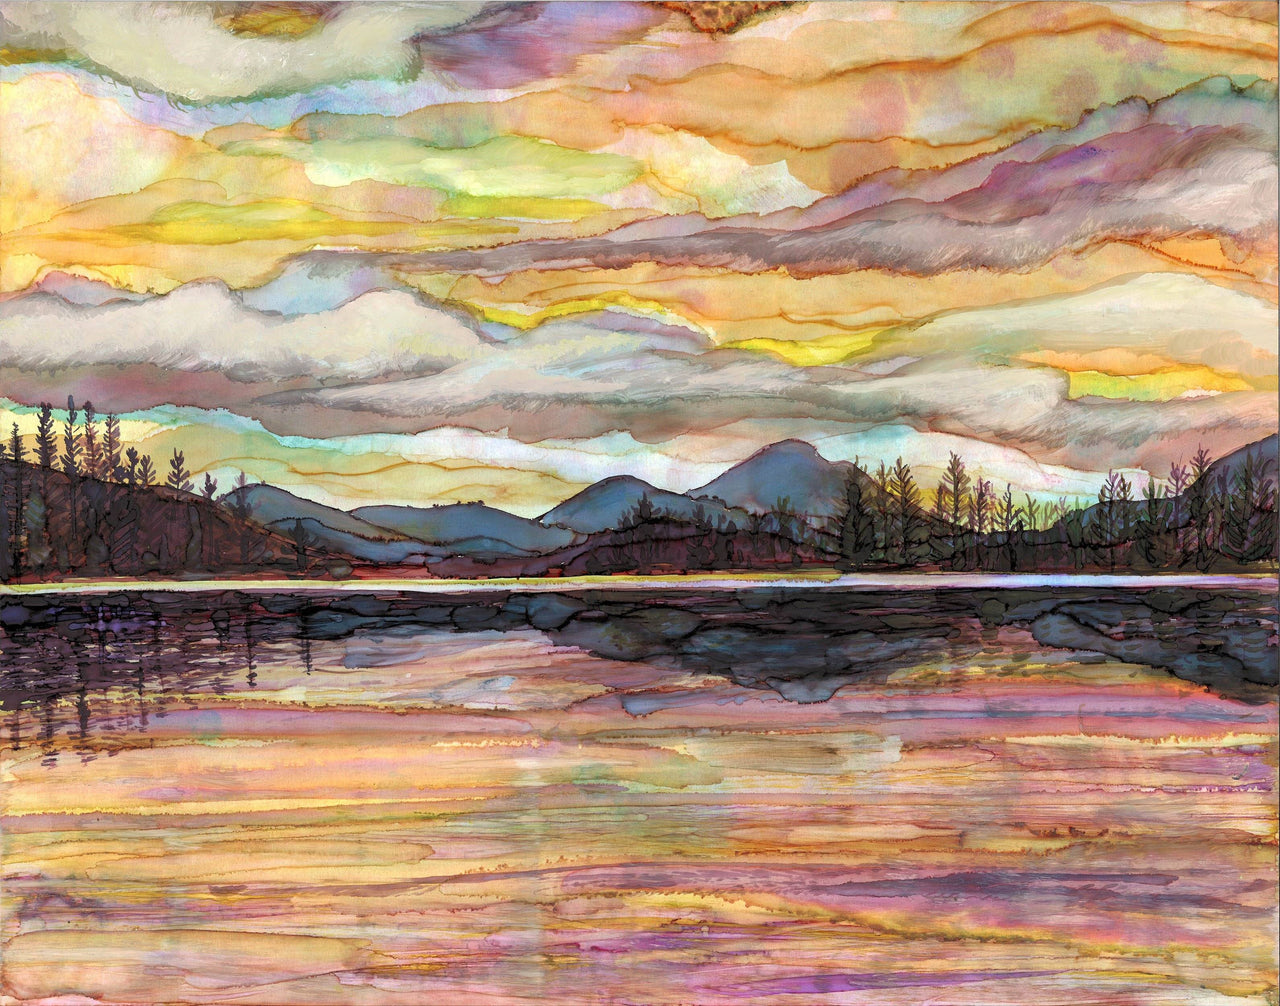 Lake Sunset Landscape Painting : Art Prints and Greeting Cards